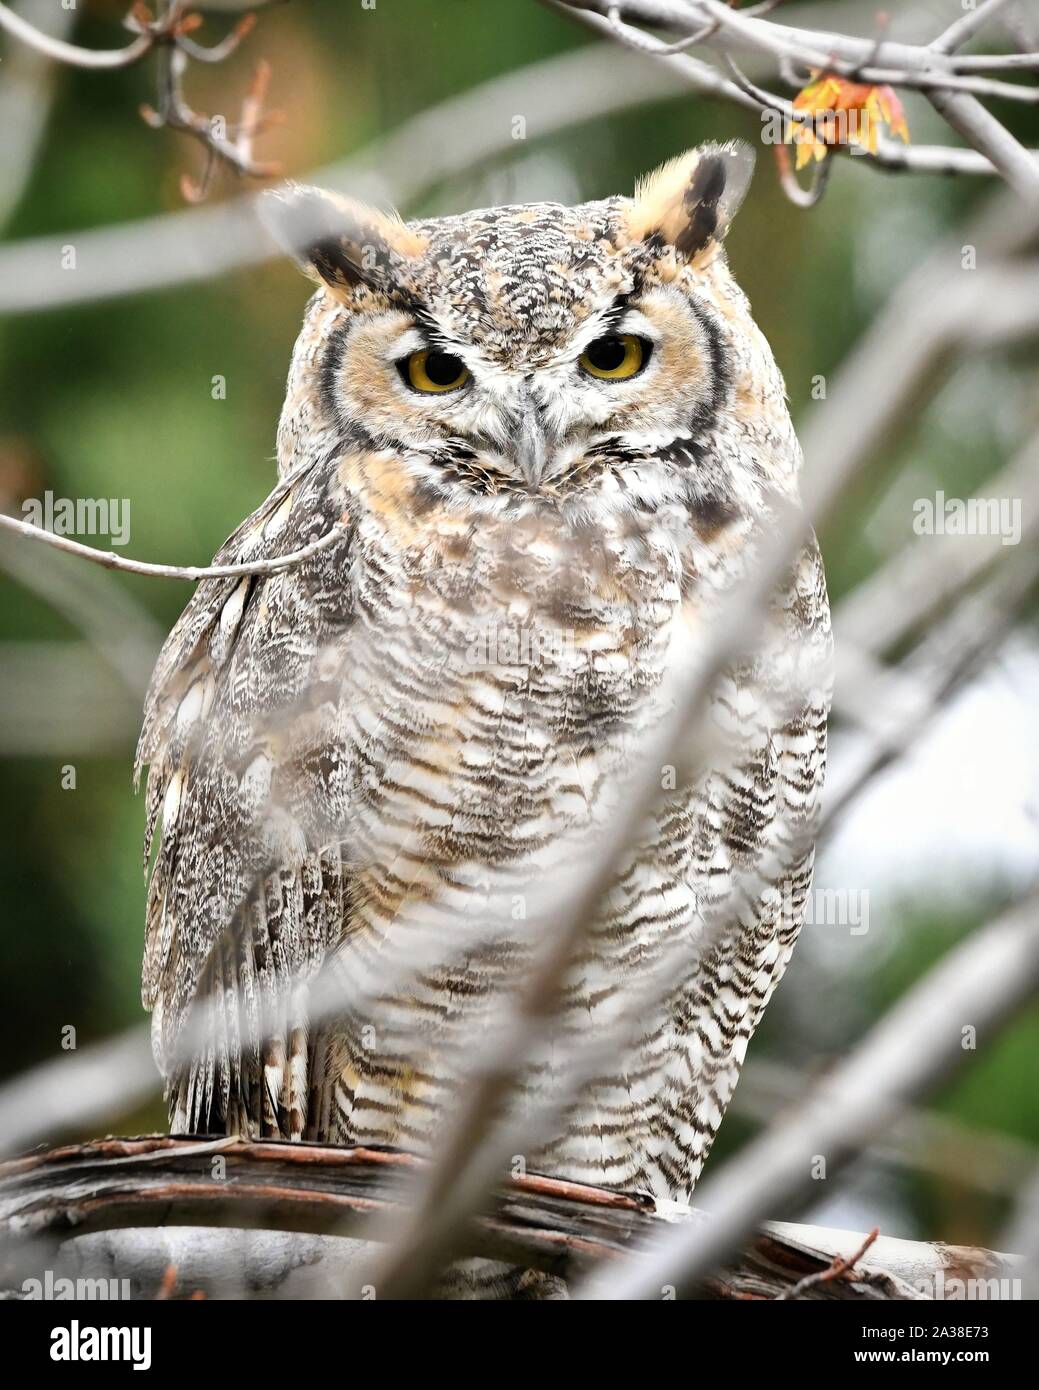 Great Horned Owl Peeking Through Branches, Colorado, United States Stock Photo